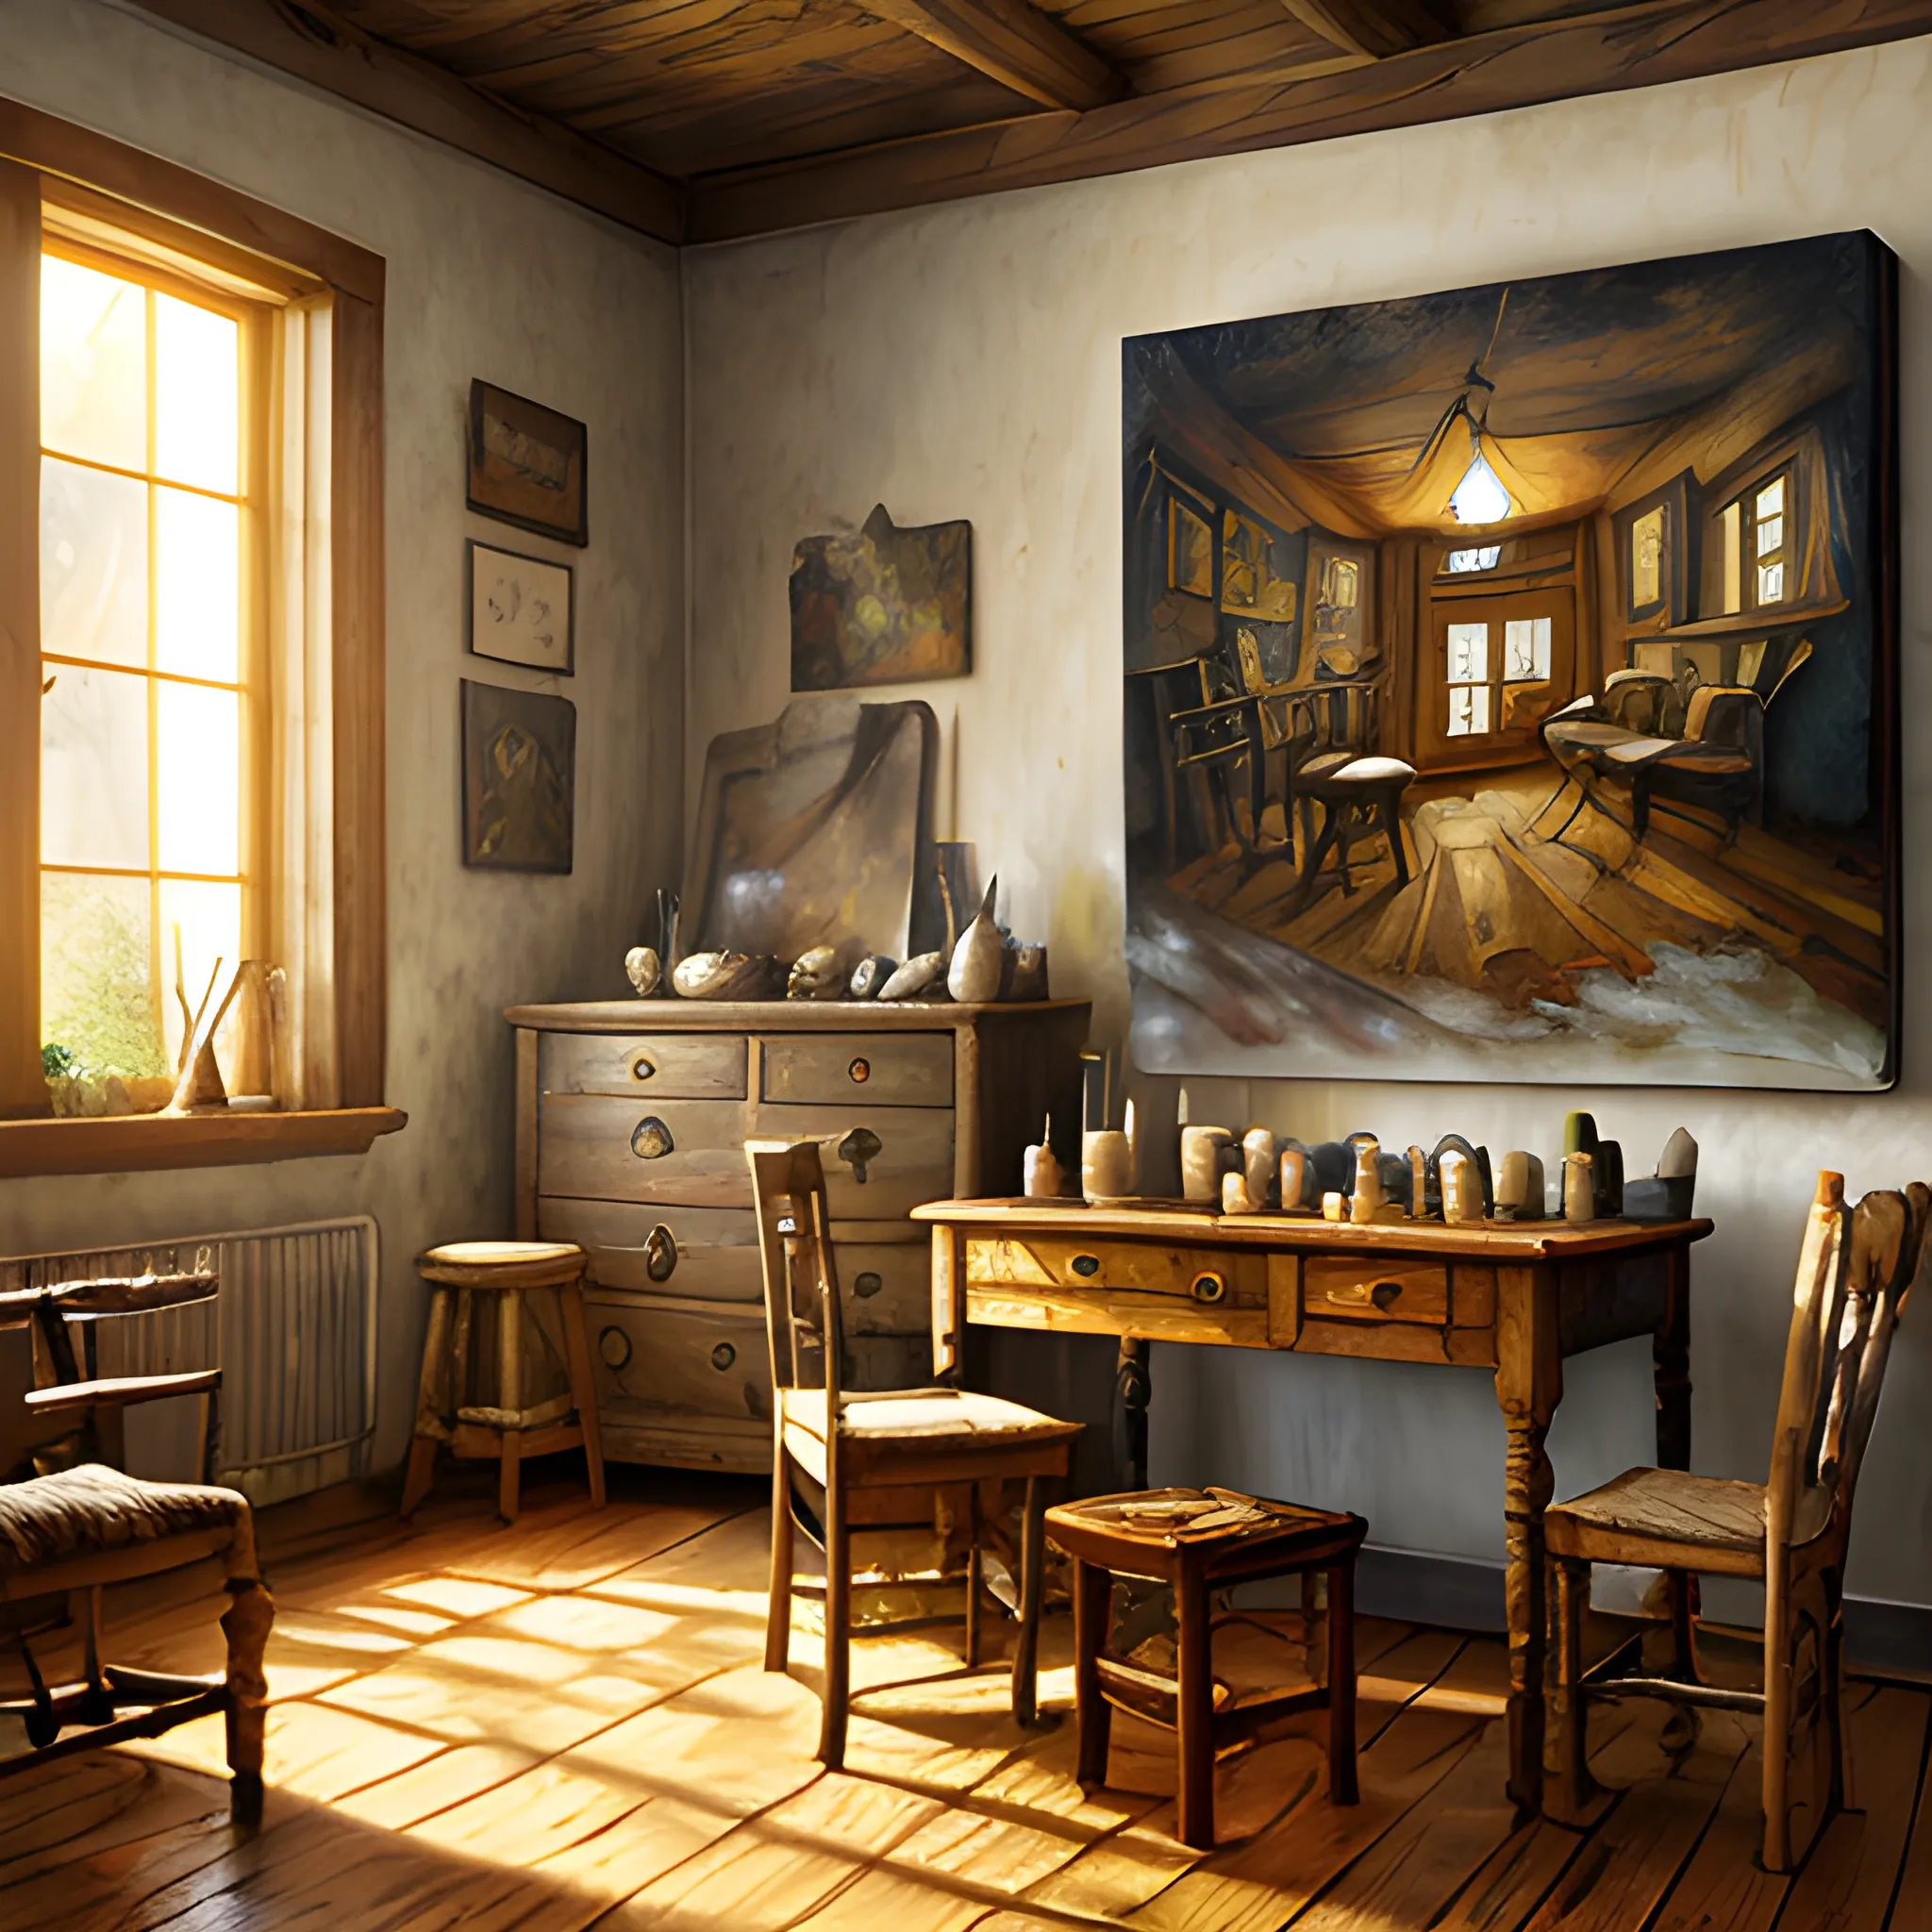 expressive rustic oil painting, interior view of a artist's studio, waxy candles, cabinets, wood furnishings, herbs hanging, wood chair, light bloom, dust, pintings all round, ambient occlusion, morning, rays of light coming through windows, dim lighting, brush strokes oil painting